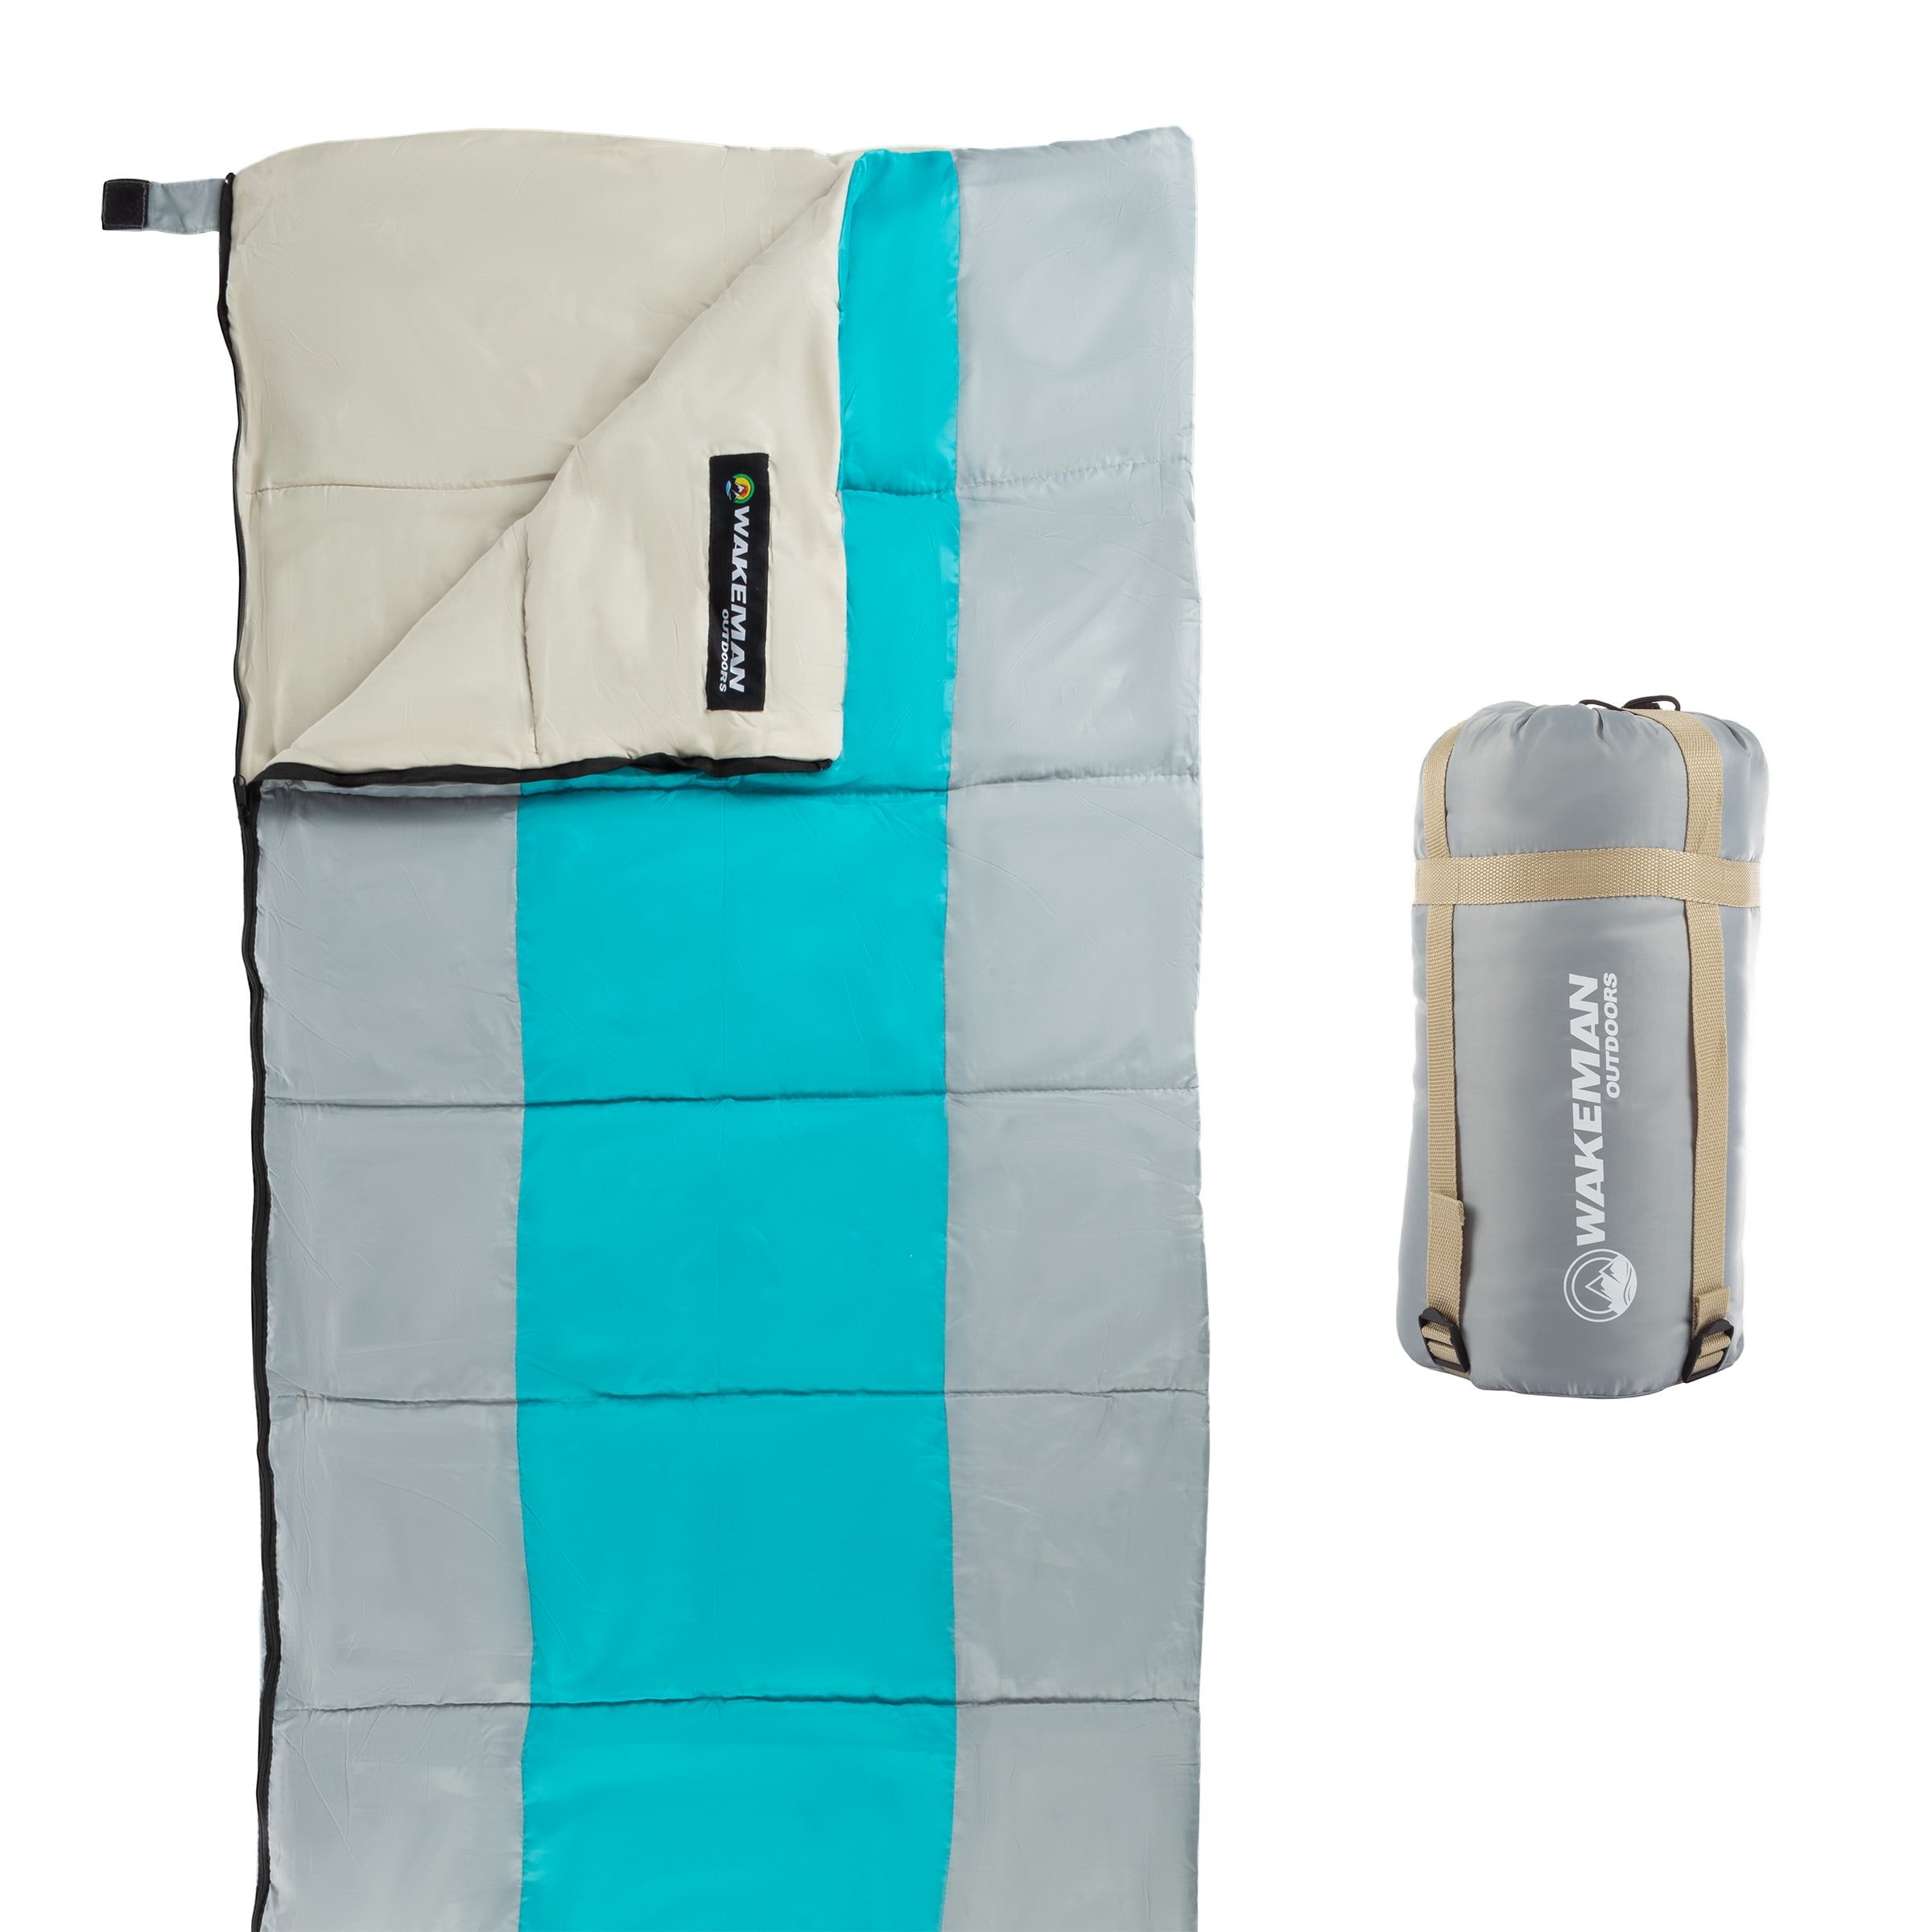 Wakeman Outdoors Lightweight Sleeping Bag with Carrying Bag and Compression  Straps in Turquoise/Gray HW4700048 - The Home Depot